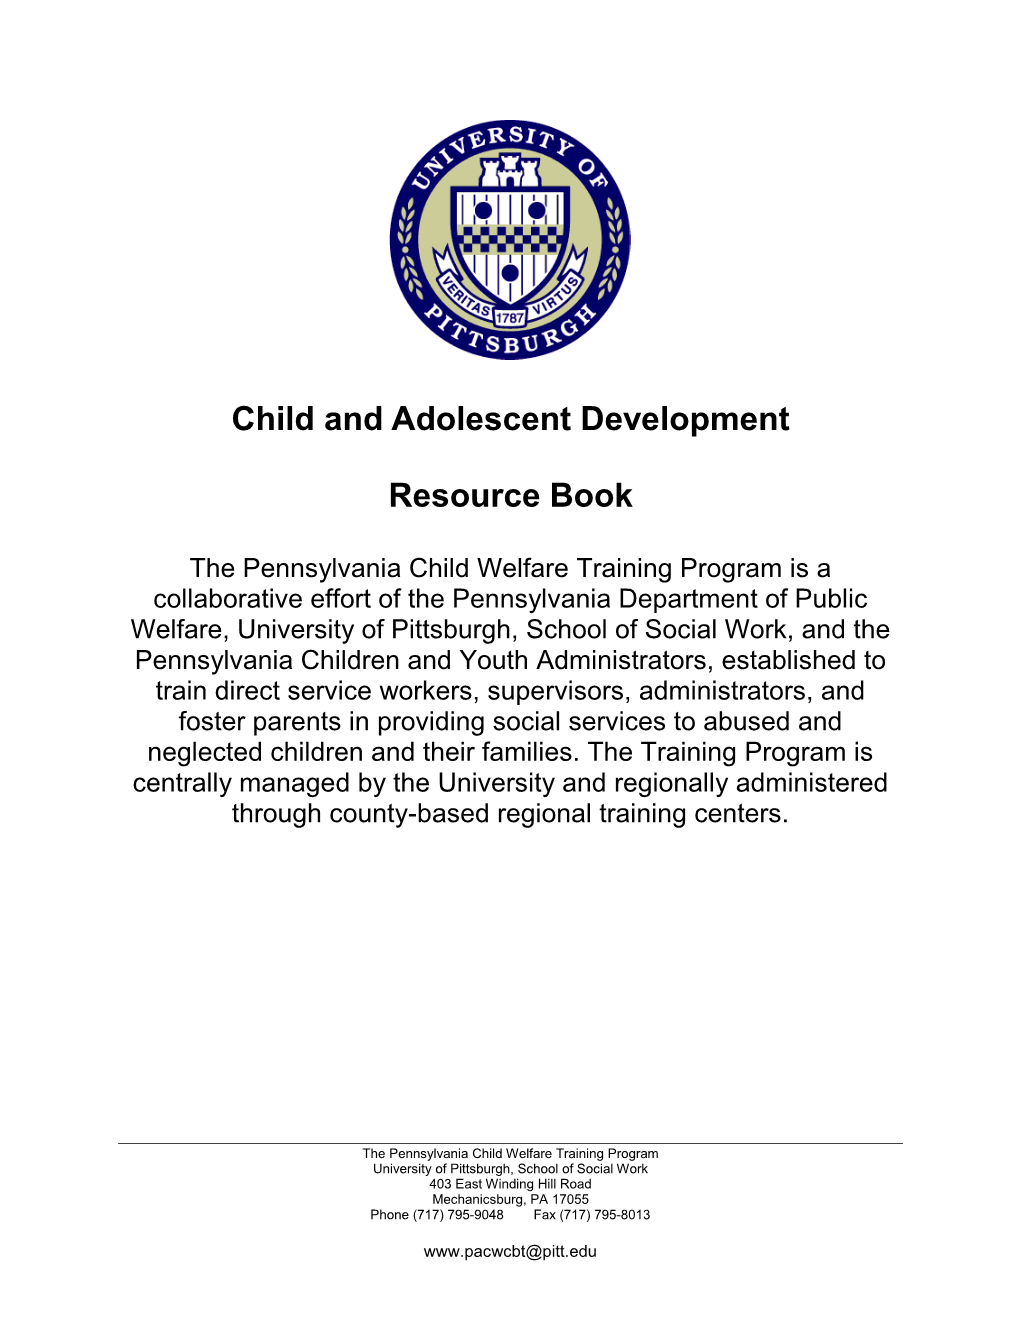 Child and Adolescent Development Resource Book Was Created for Use As Both a Training Tool and a Reference for Child Welfare Workers